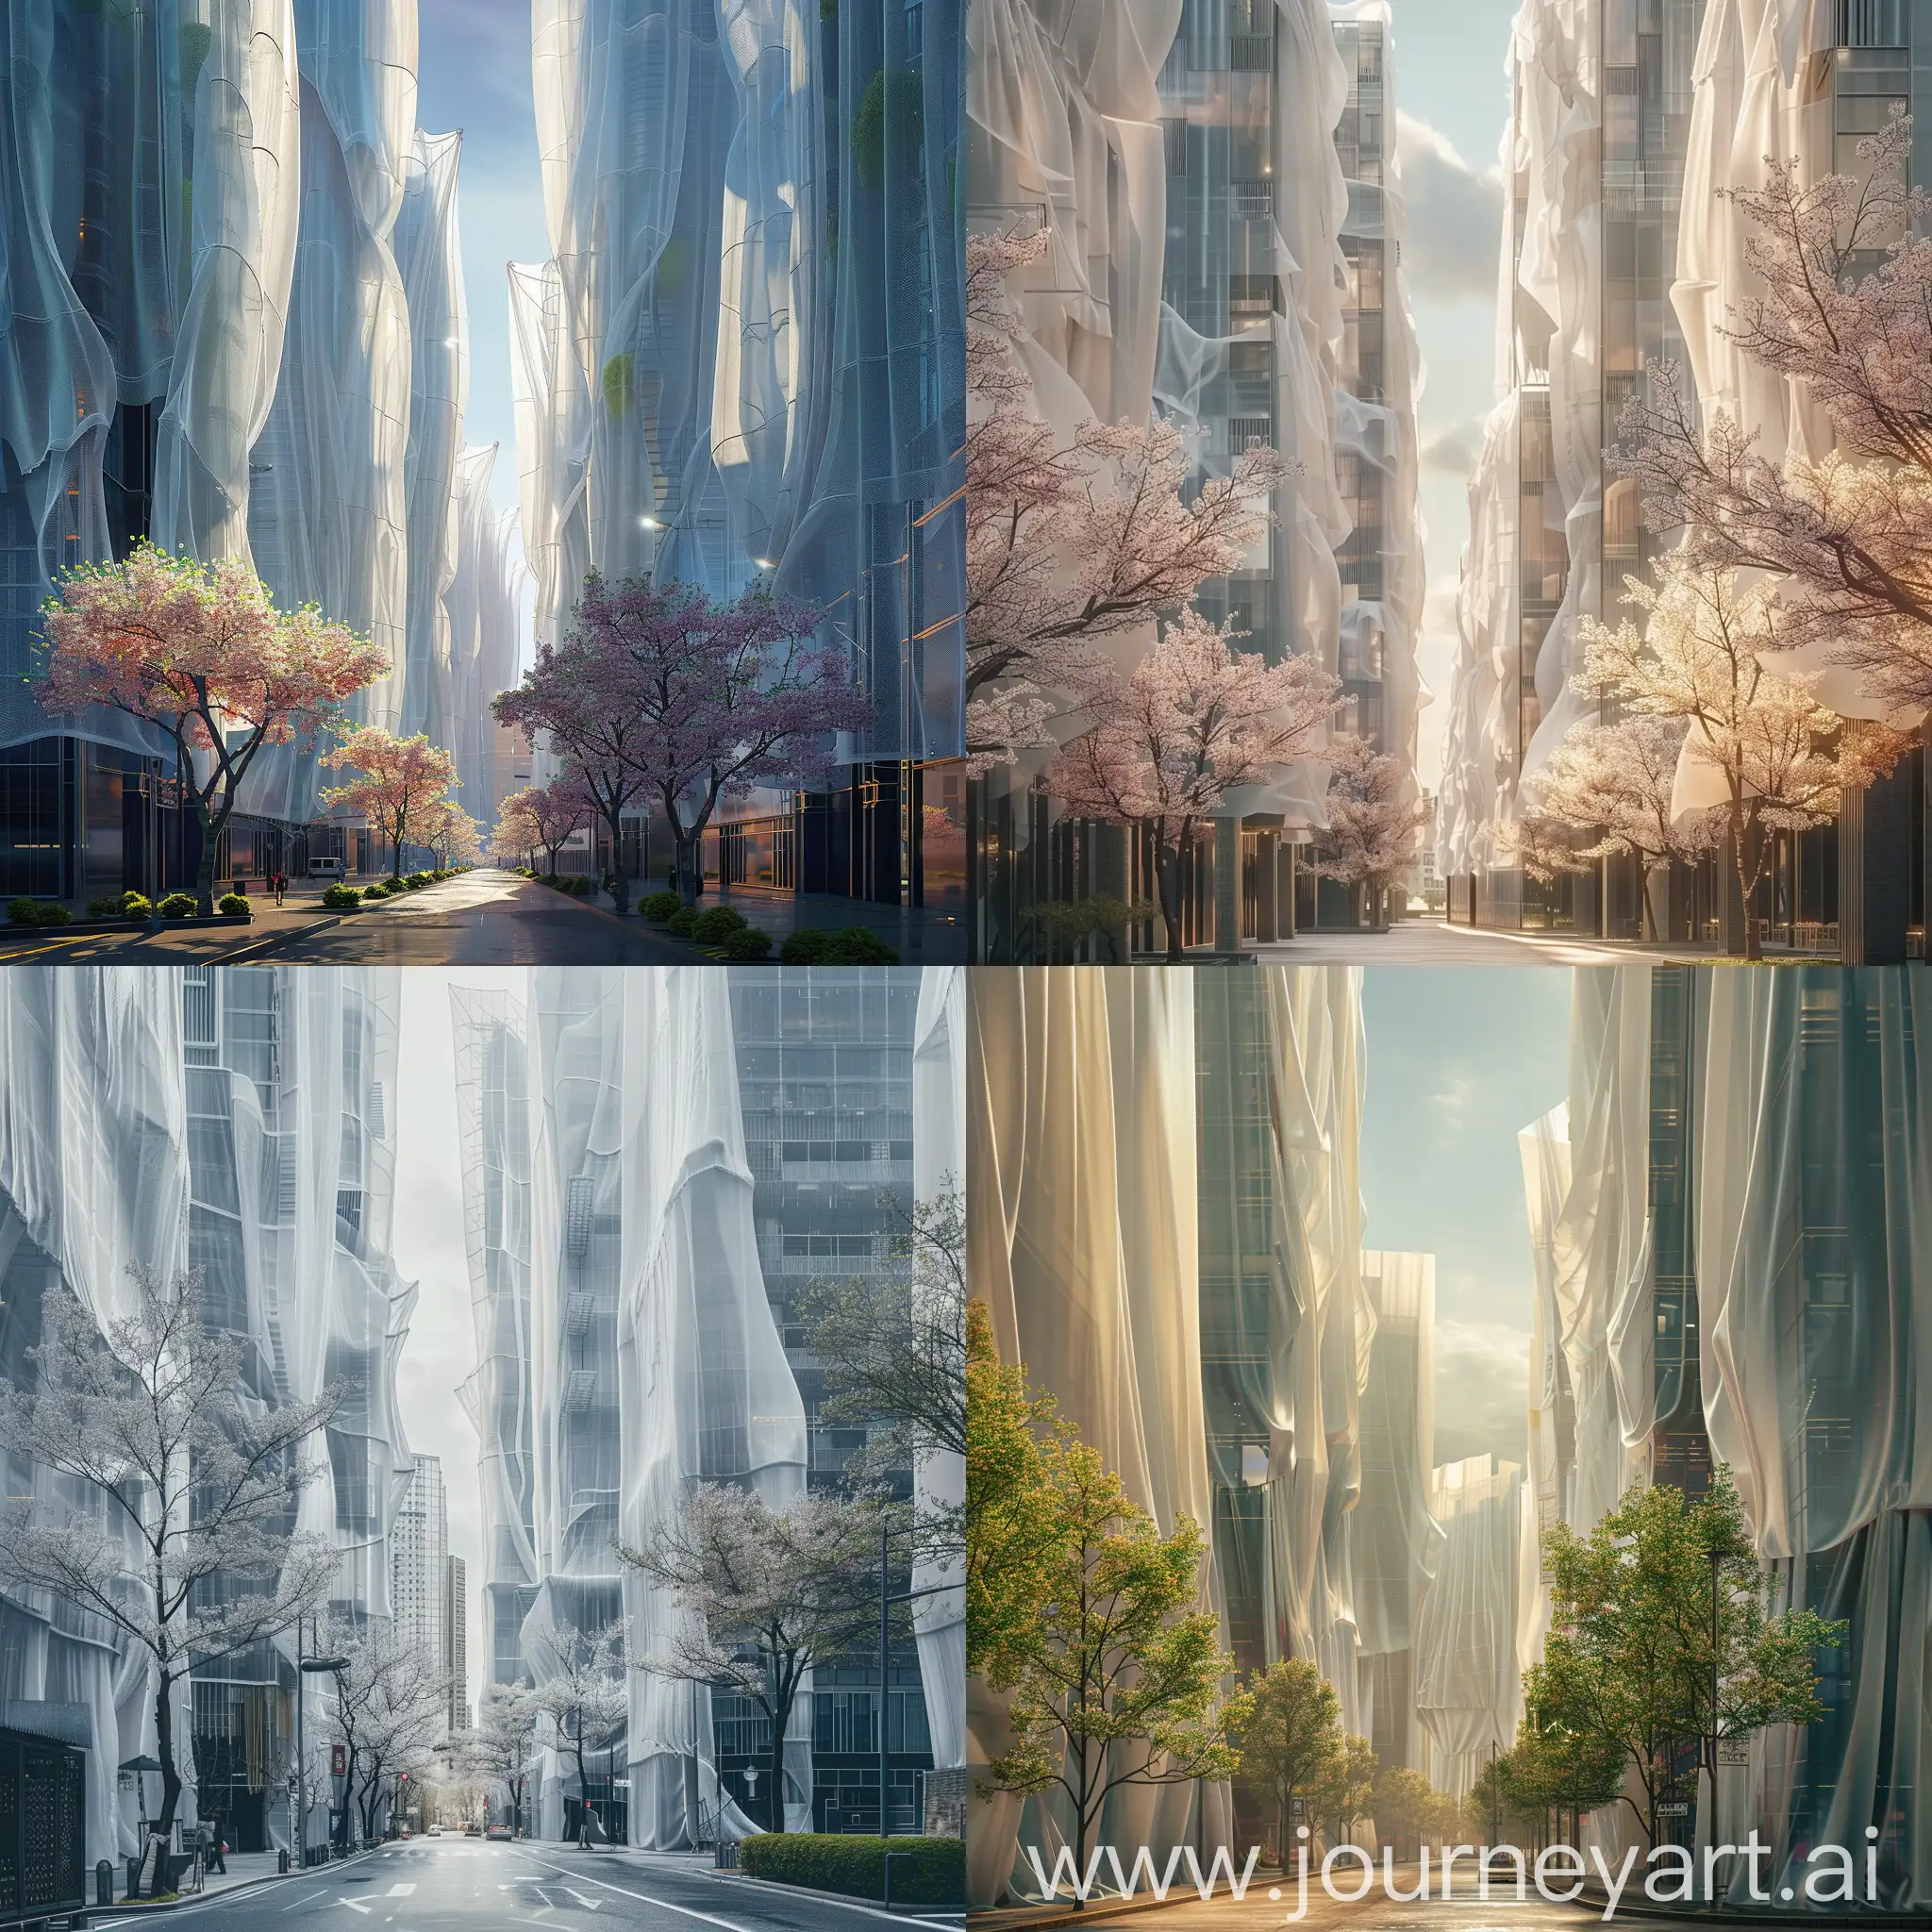 Photograph of a beautiful futuristic city of gigantic minimalist skyscrapers covered in translucent cloth, beautiful architecture, spring, street level